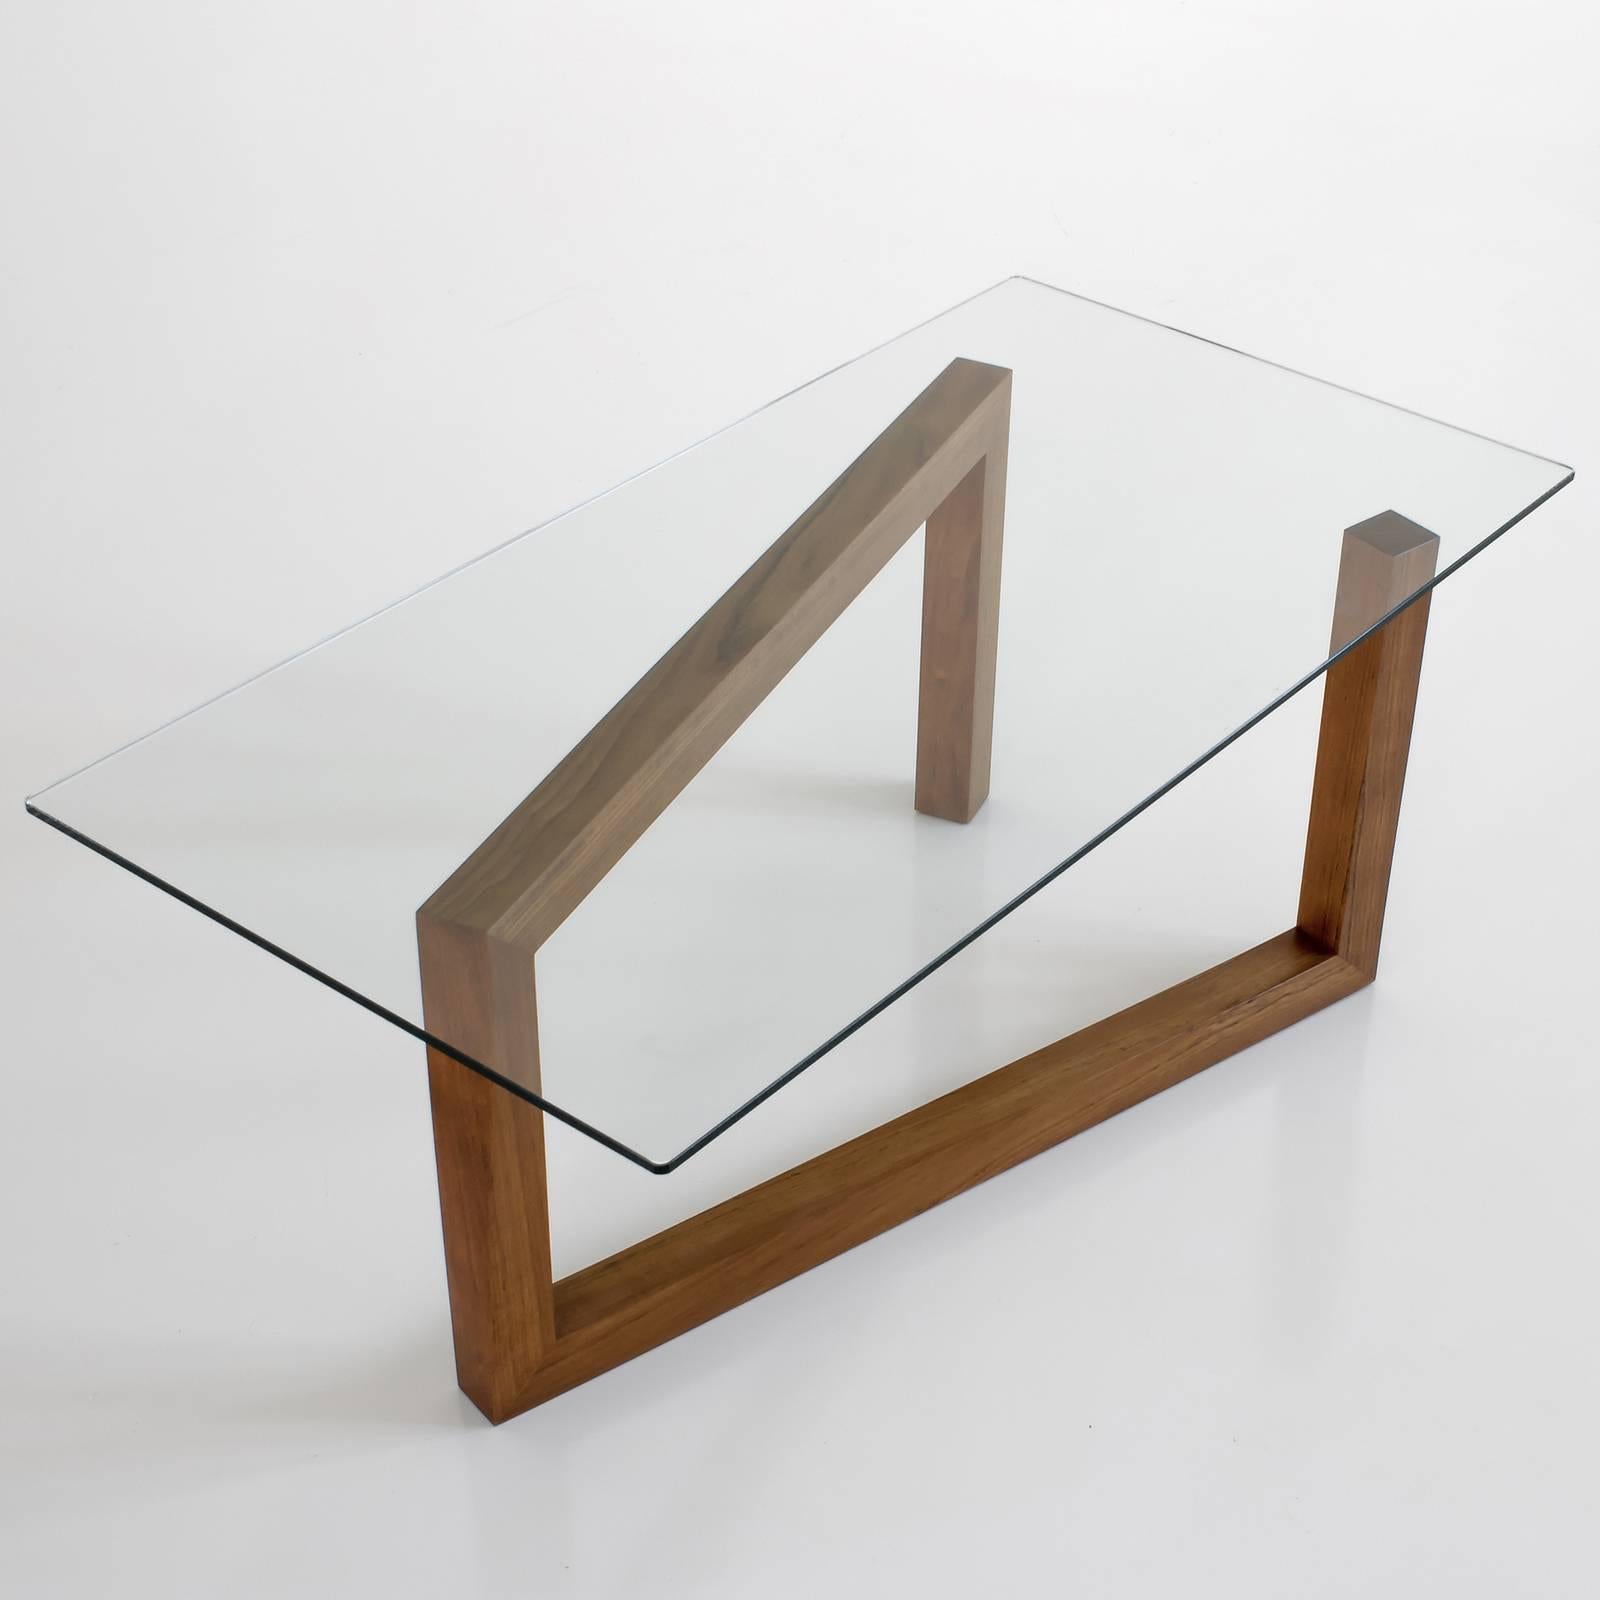 Inspired by the iconic Noguchi table created by Japanese sculptor Isamu Noguchi, this remarkable coffee table strikes a perfect balance between art and design. Made of a single piece of solid wood, the zigzag-shaped base supports a rectangular,